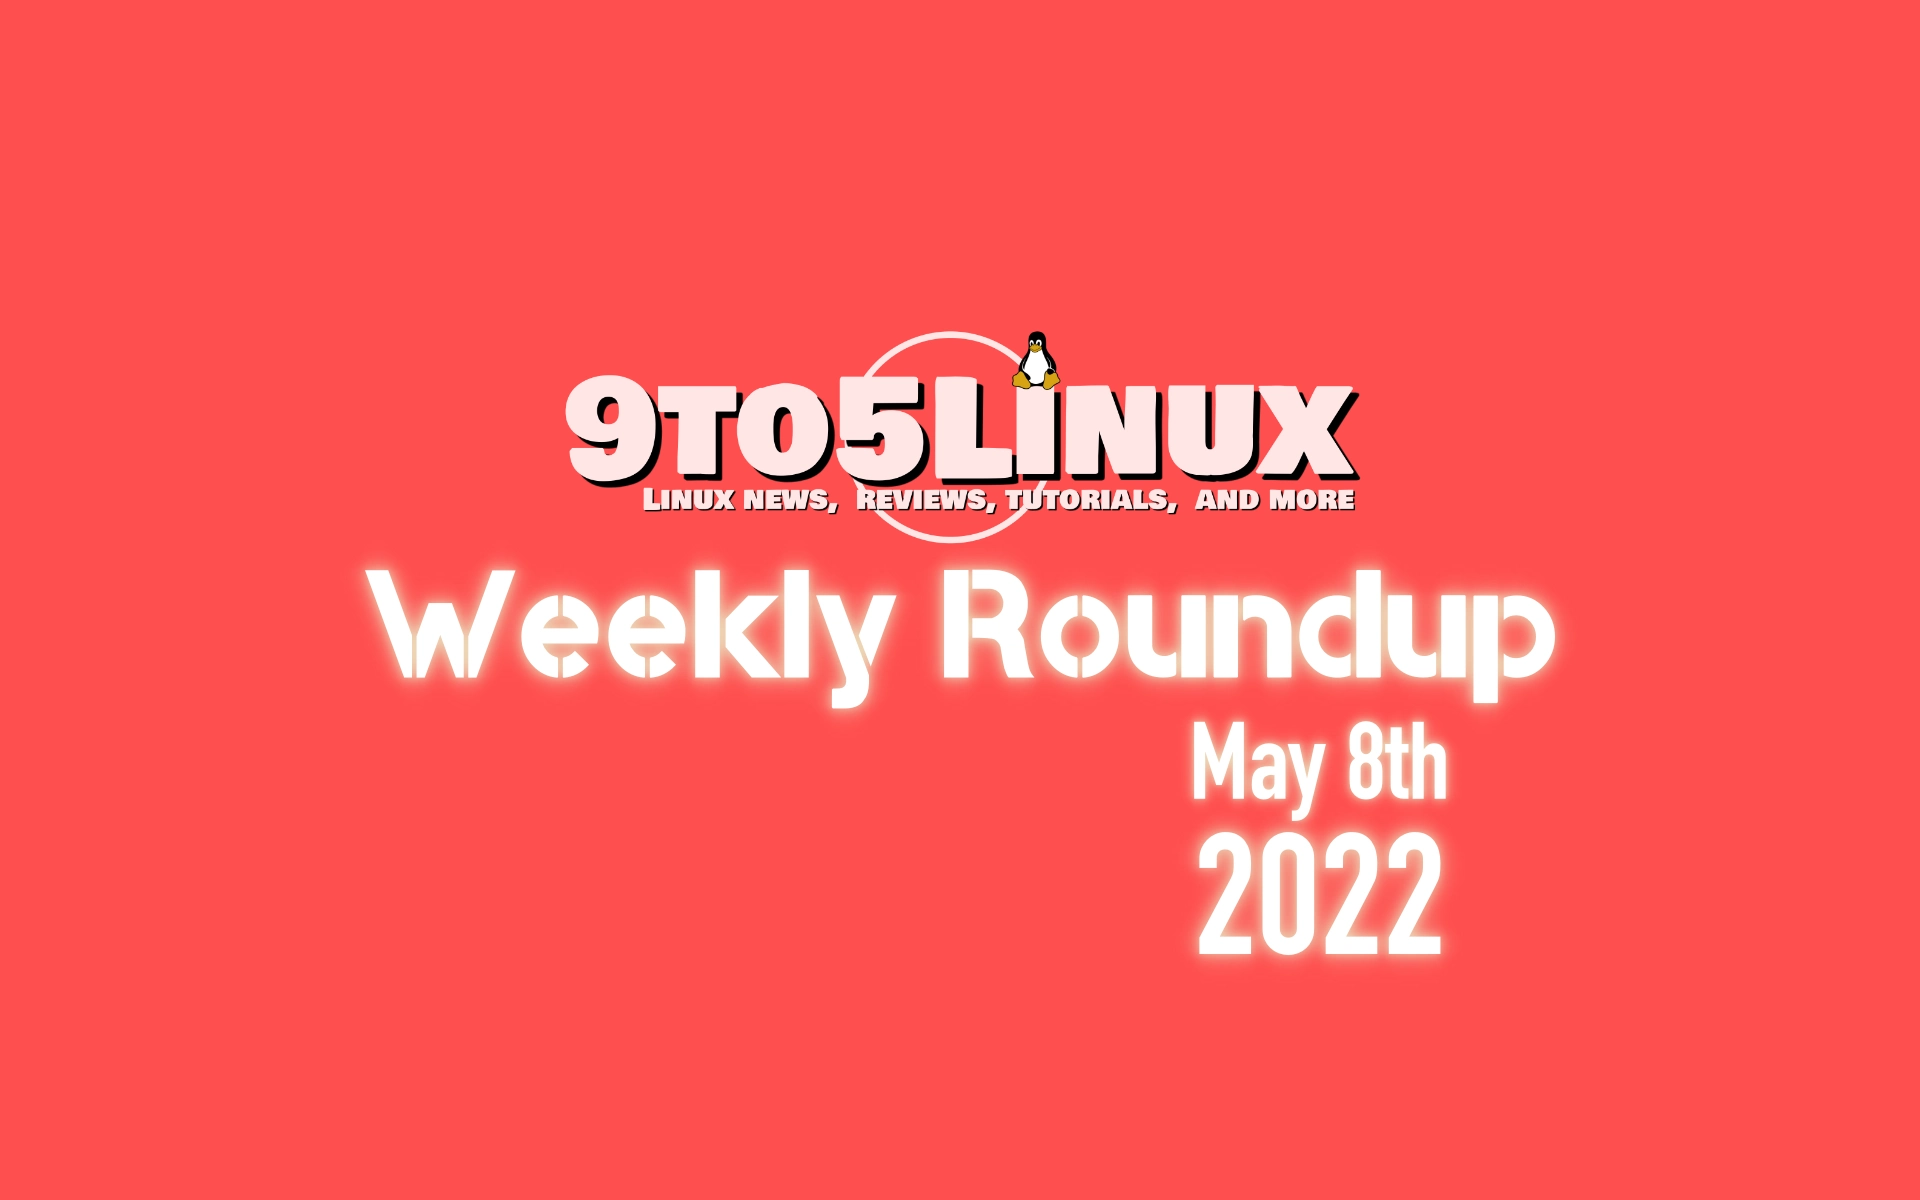 9to5Linux Weekly Roundup: May 8th, 2022